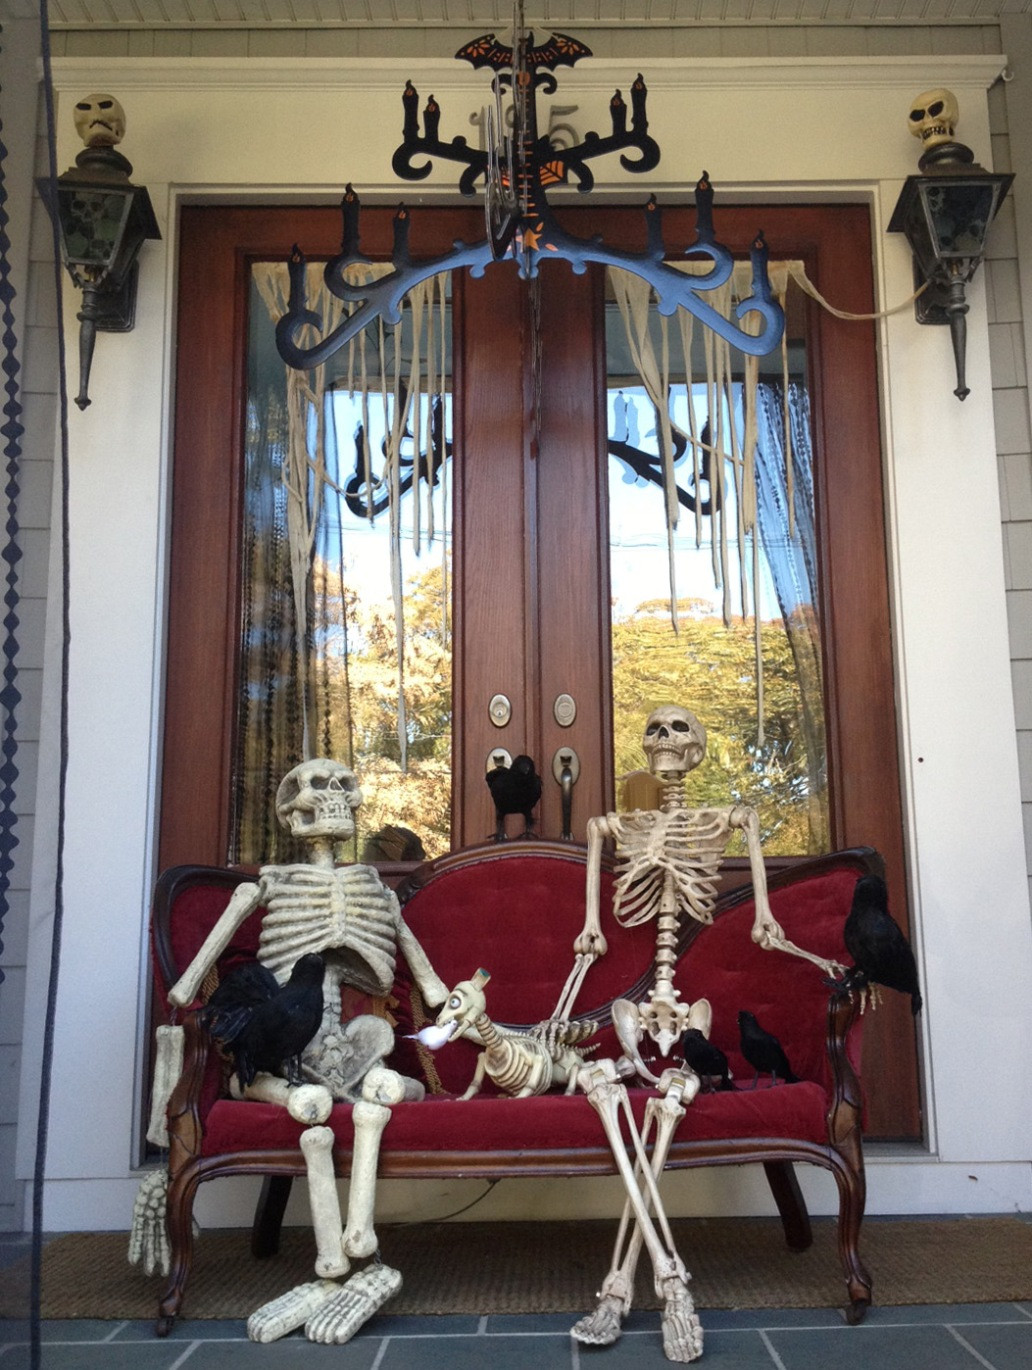 Halloween Porch Decorations
 Cute Halloween Front Porch Decorations to Greet Your Guests